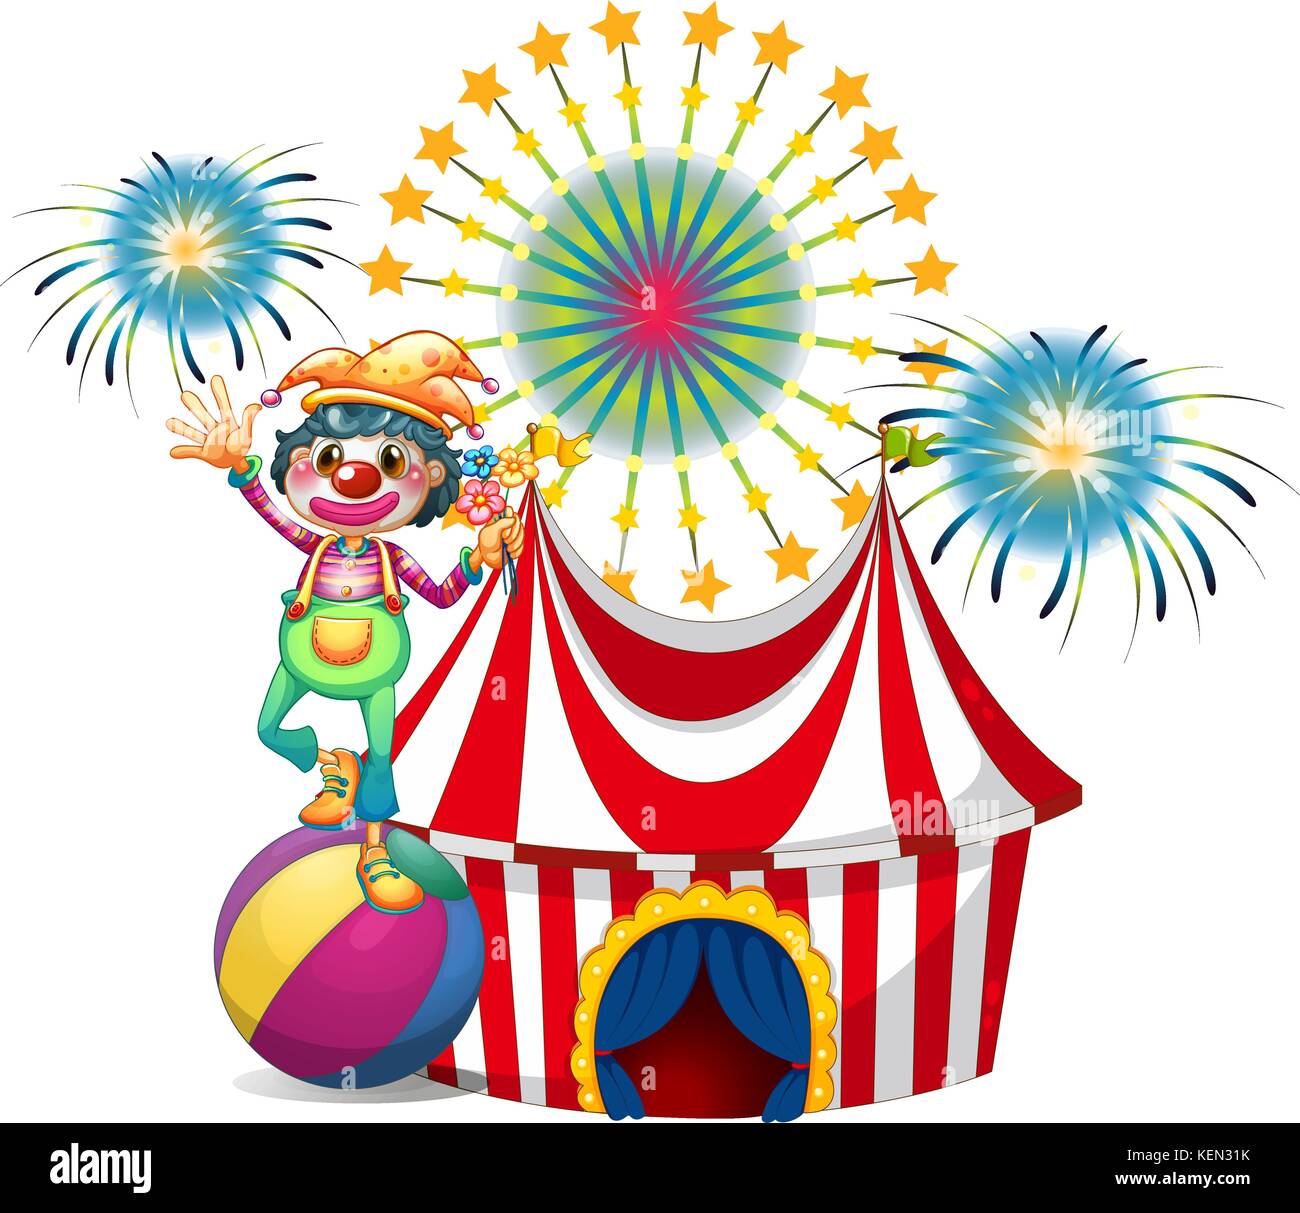 Illustration of a clown near the circus tent on a white background Stock Vector